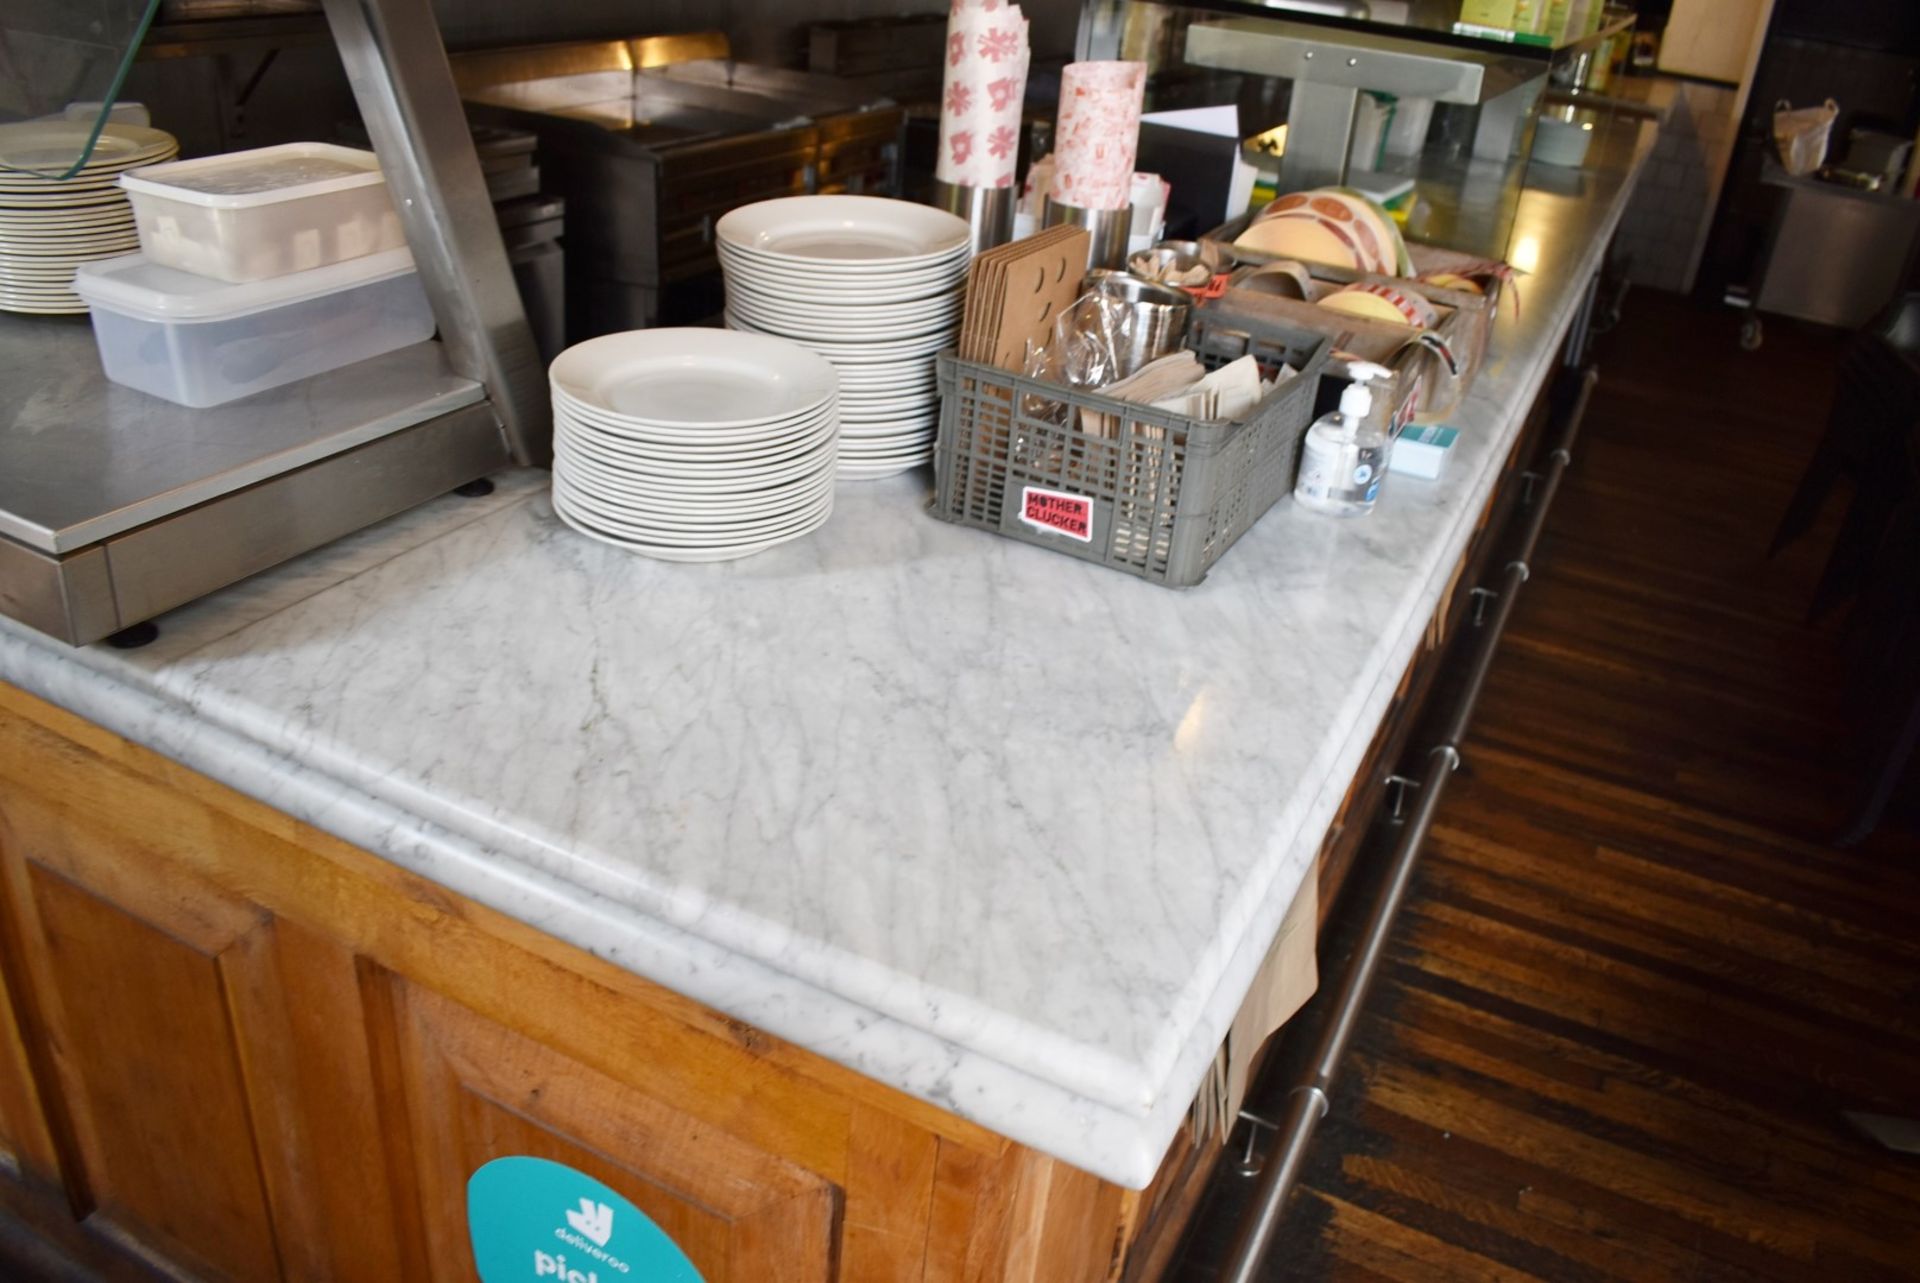 1 x Large 30ft Wood Panel Bar With White Marble Top, Heated Glass Gantry and Chrome Foot Rail - Image 17 of 22